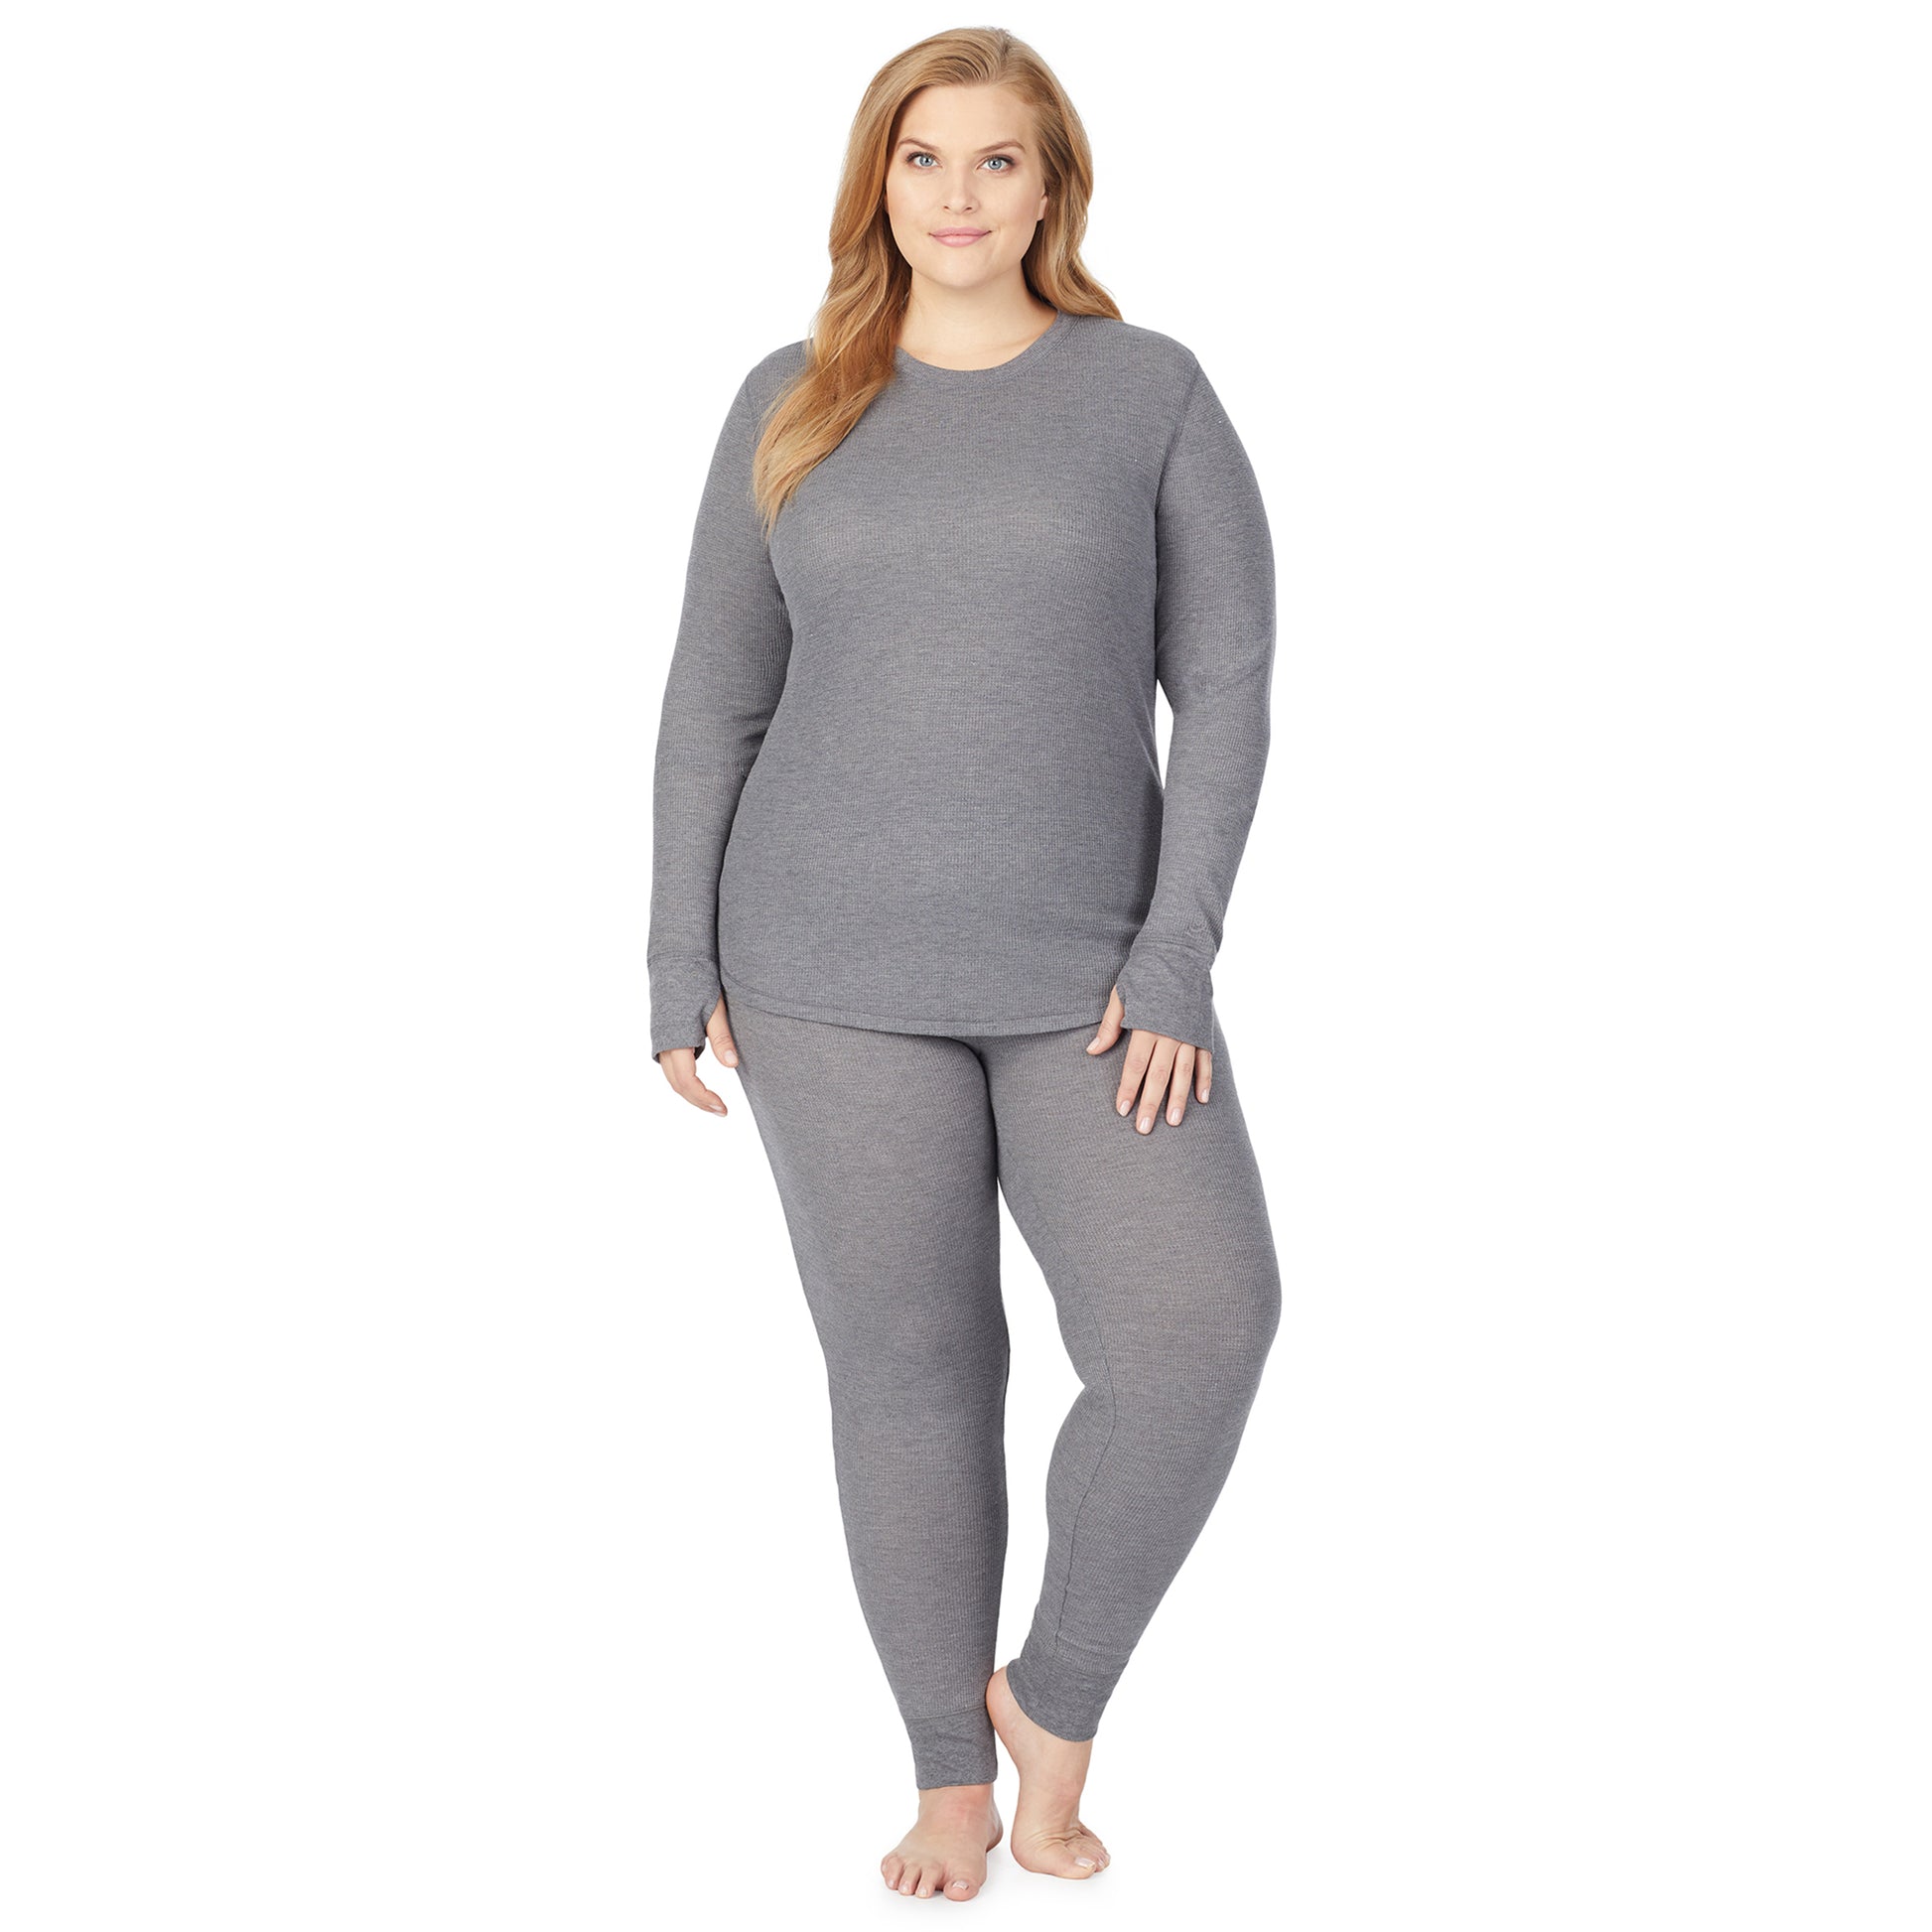 Stone Grey Heather;Model is wearing size 1X. She is 5'9", Bust 38", Waist 36", Hips 48.5". @A lady wearing a stone grey heather legging plus.